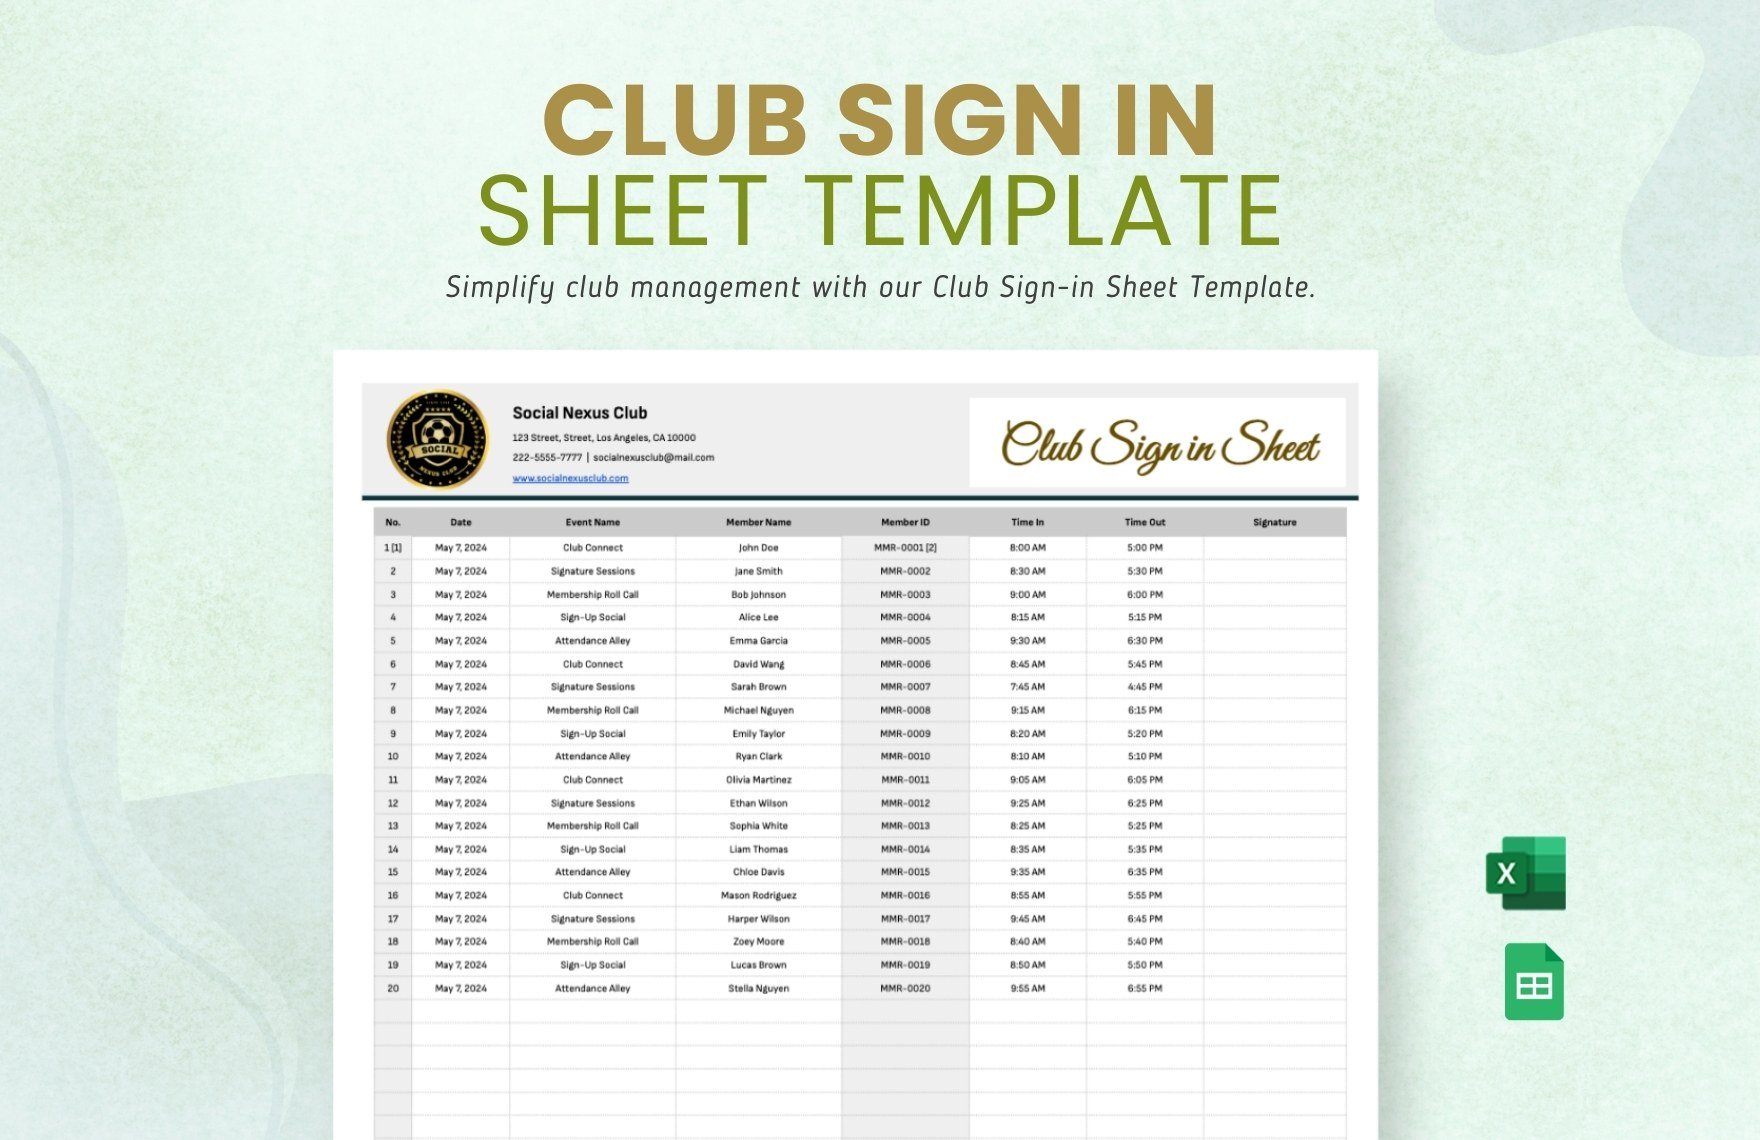 Club Sign in Sheet Template in Excel, Google Sheets